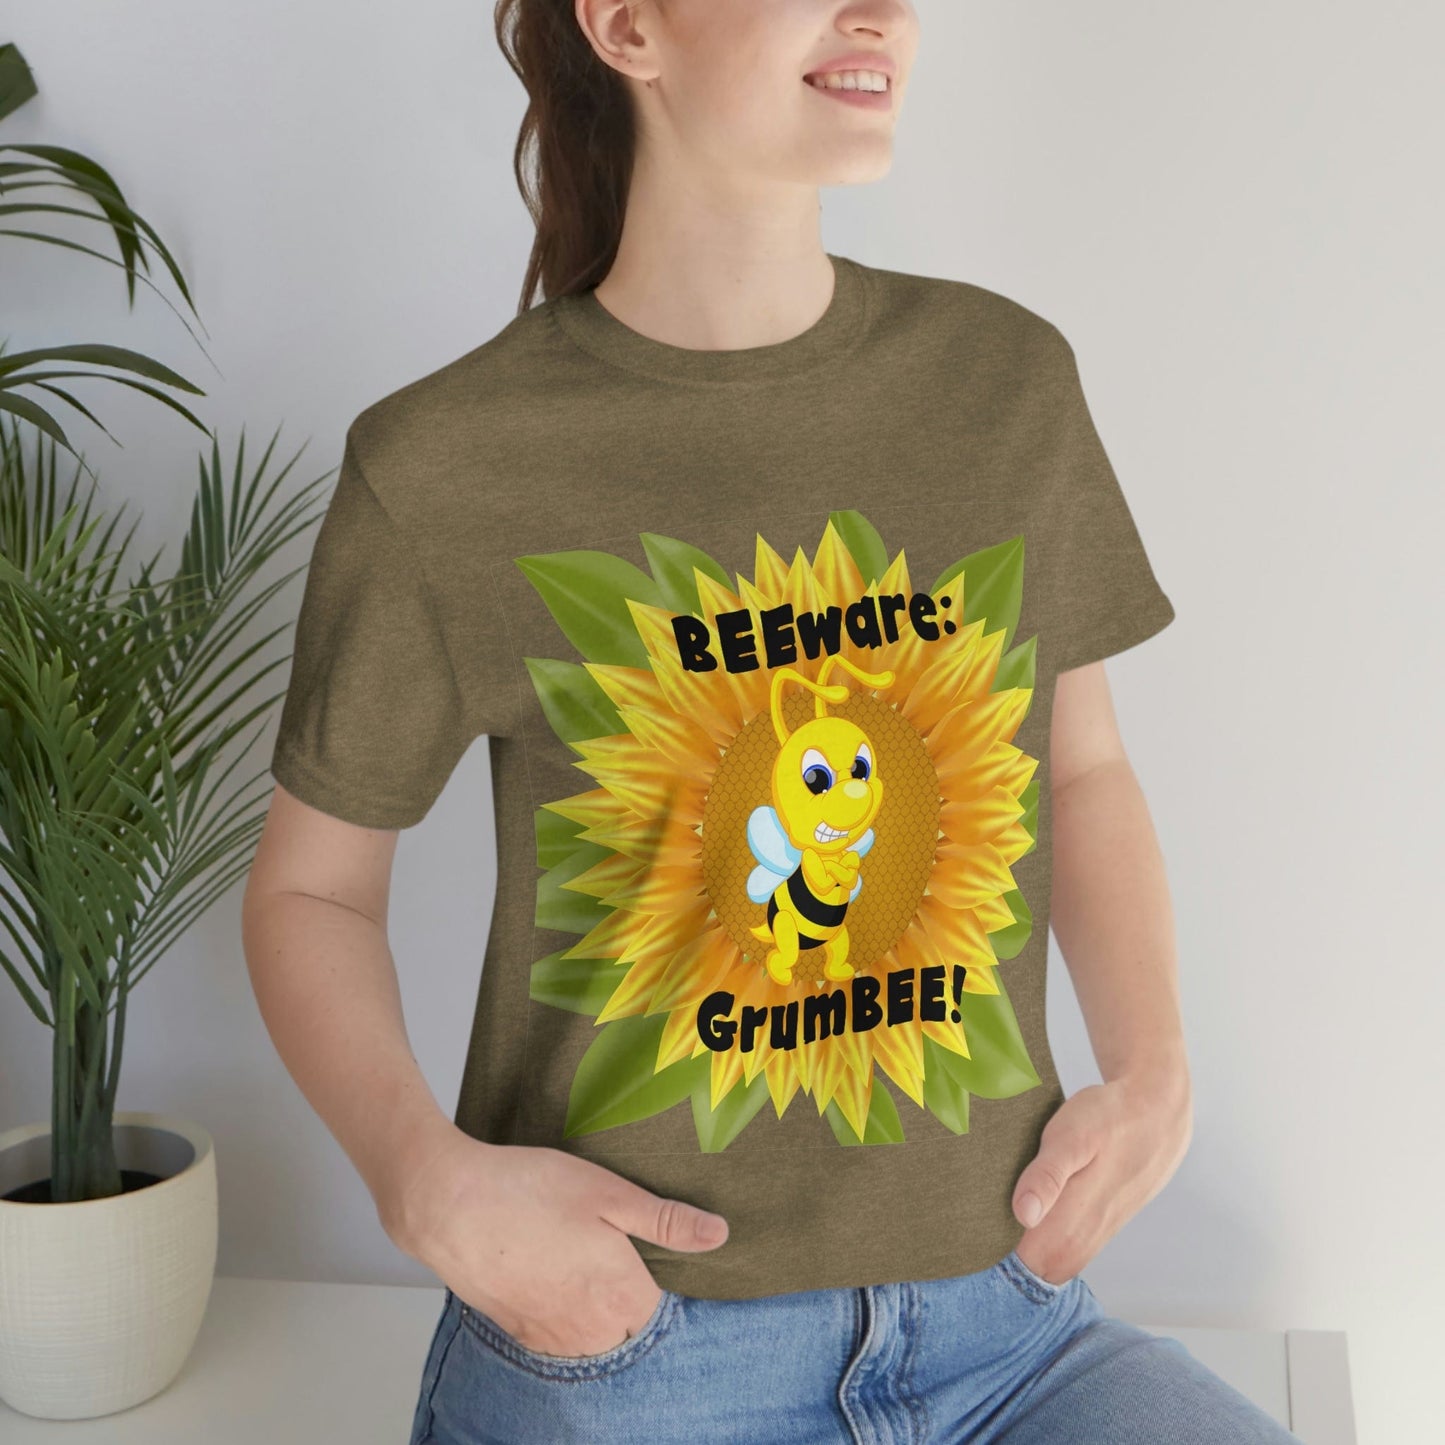 Bee Shirt, Witty Goofy Bee T Shirt, BEEware GrumBEE Sarcastic Silly Shirt, Kawaii Best Selling Shirts, Cool Soft Bella Canvas Graphic Tee